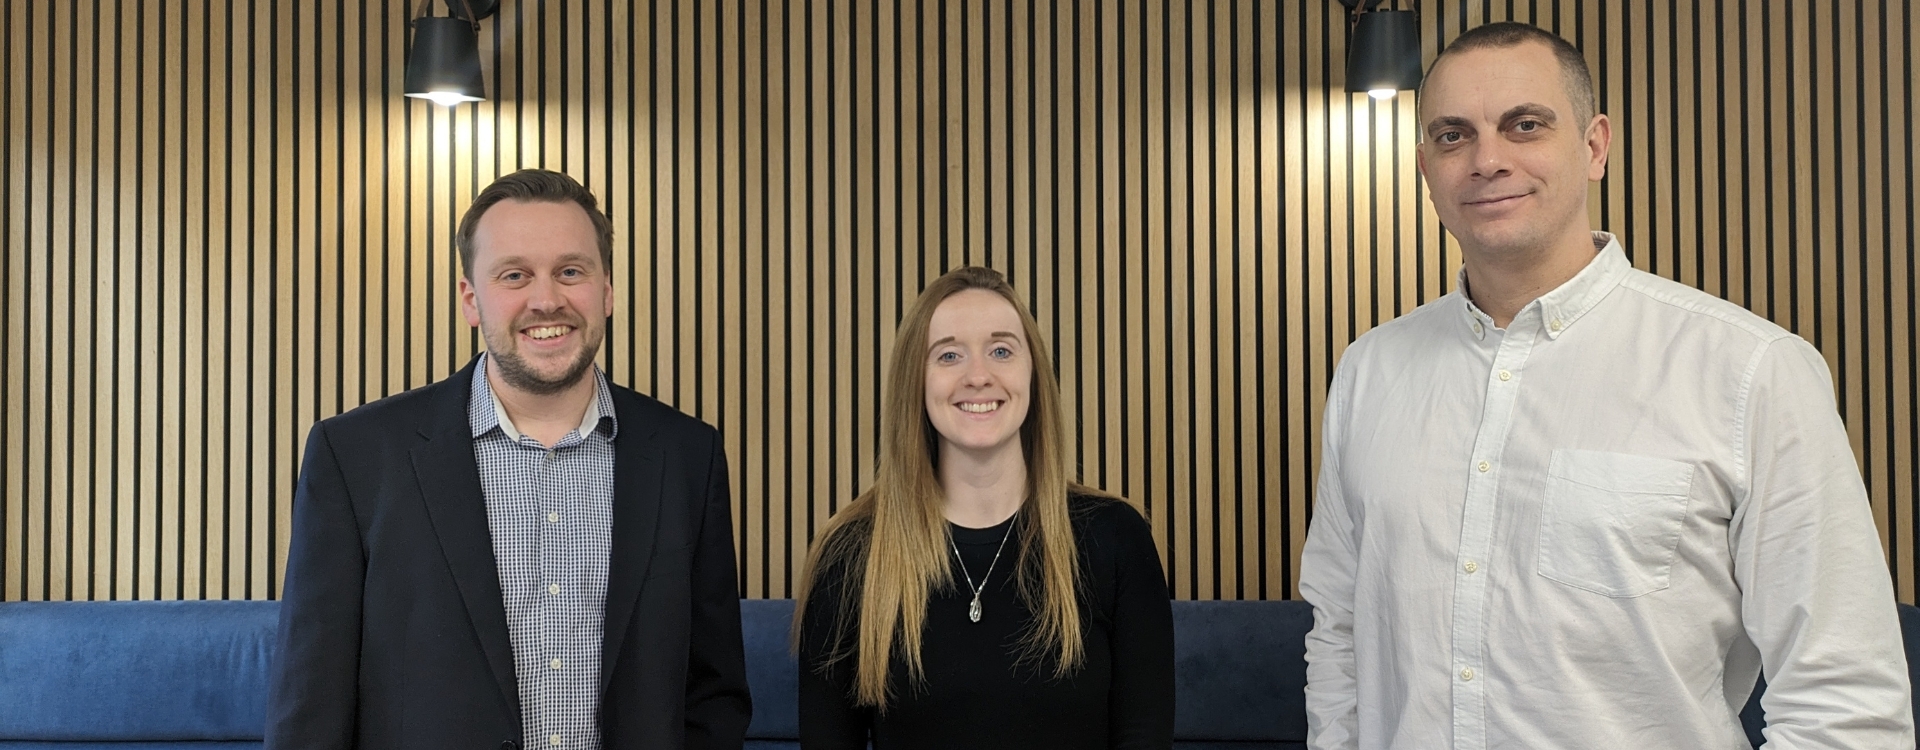 Carpenter Box announces latest promotions and addition to Audit team